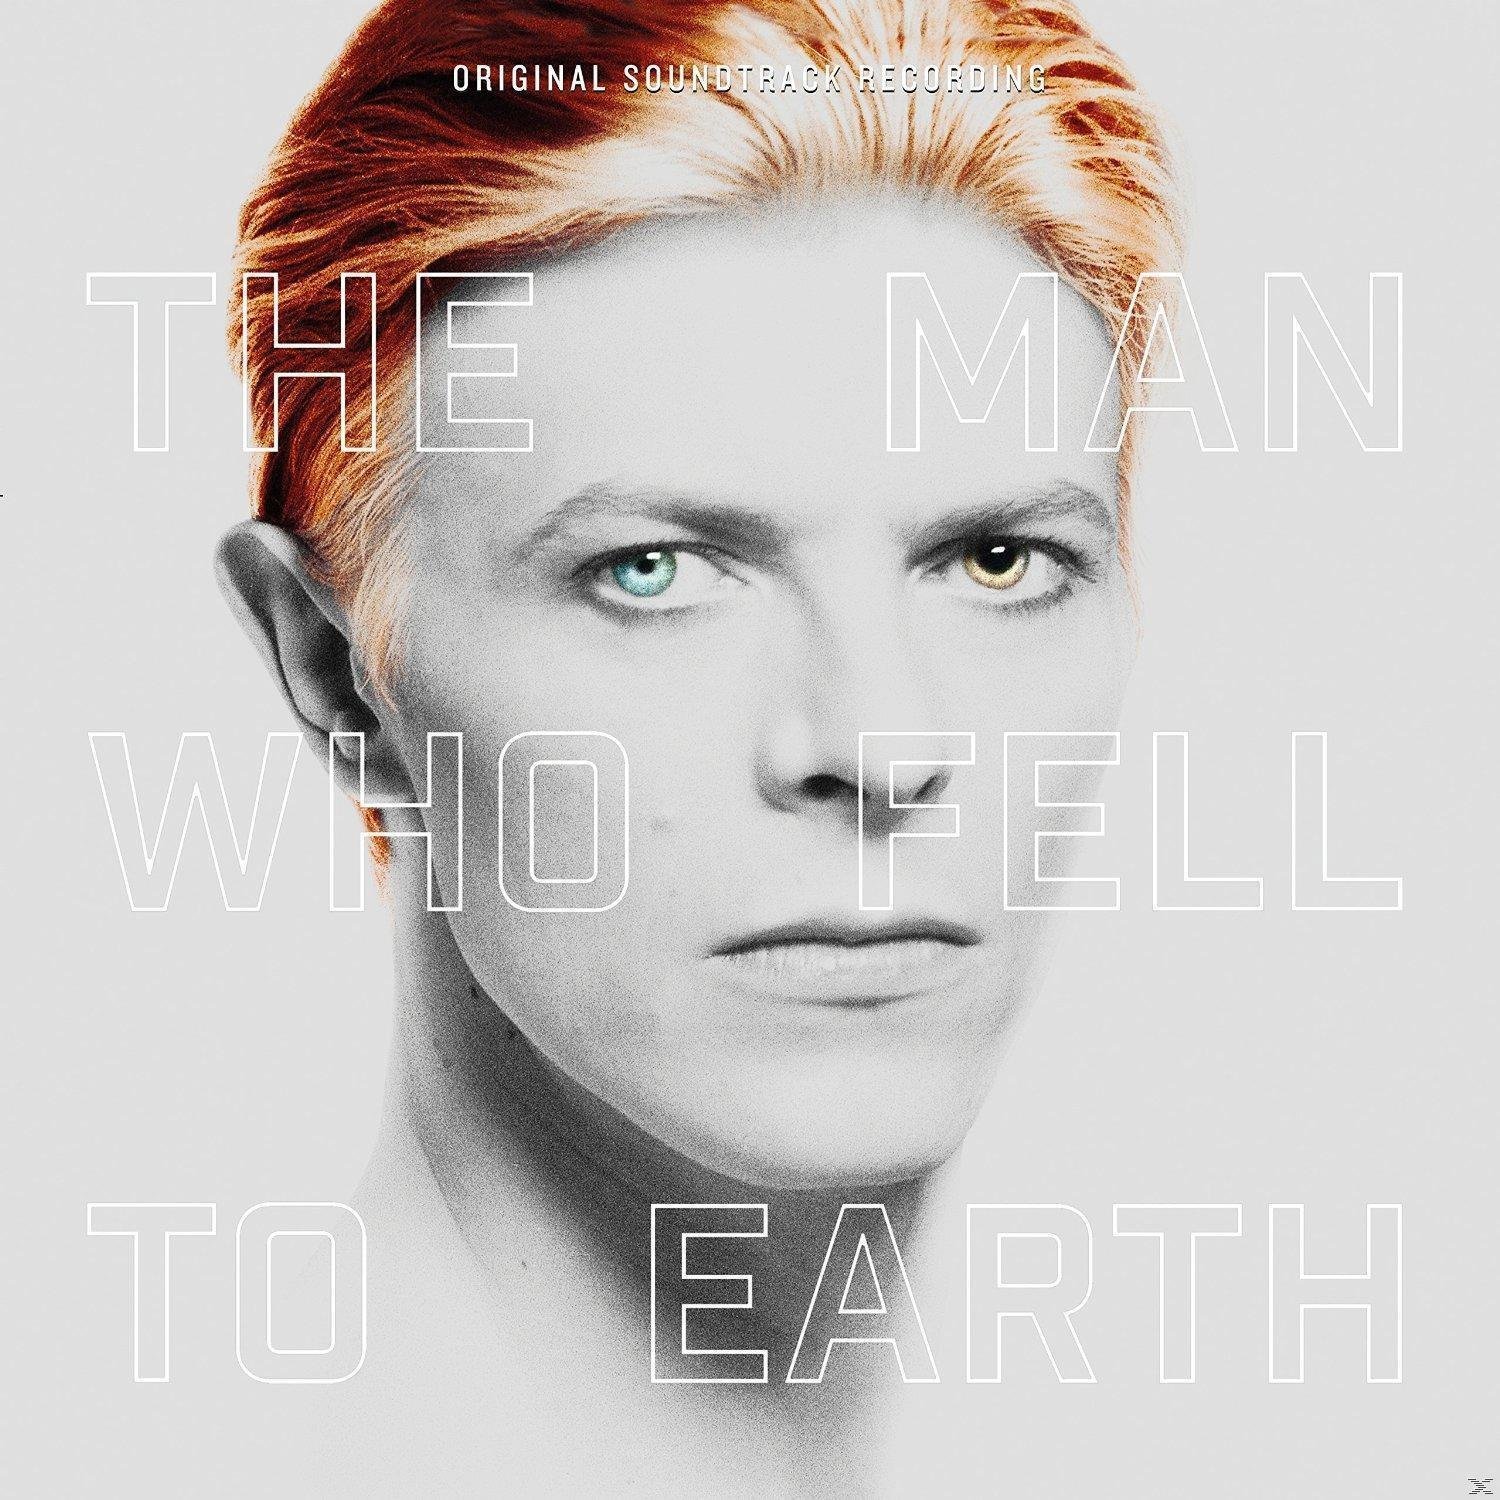 Schallplatte David Bowie - The Man Who Fell To Earth OST (Starring David Bowie) (2 LP + 2 CD)